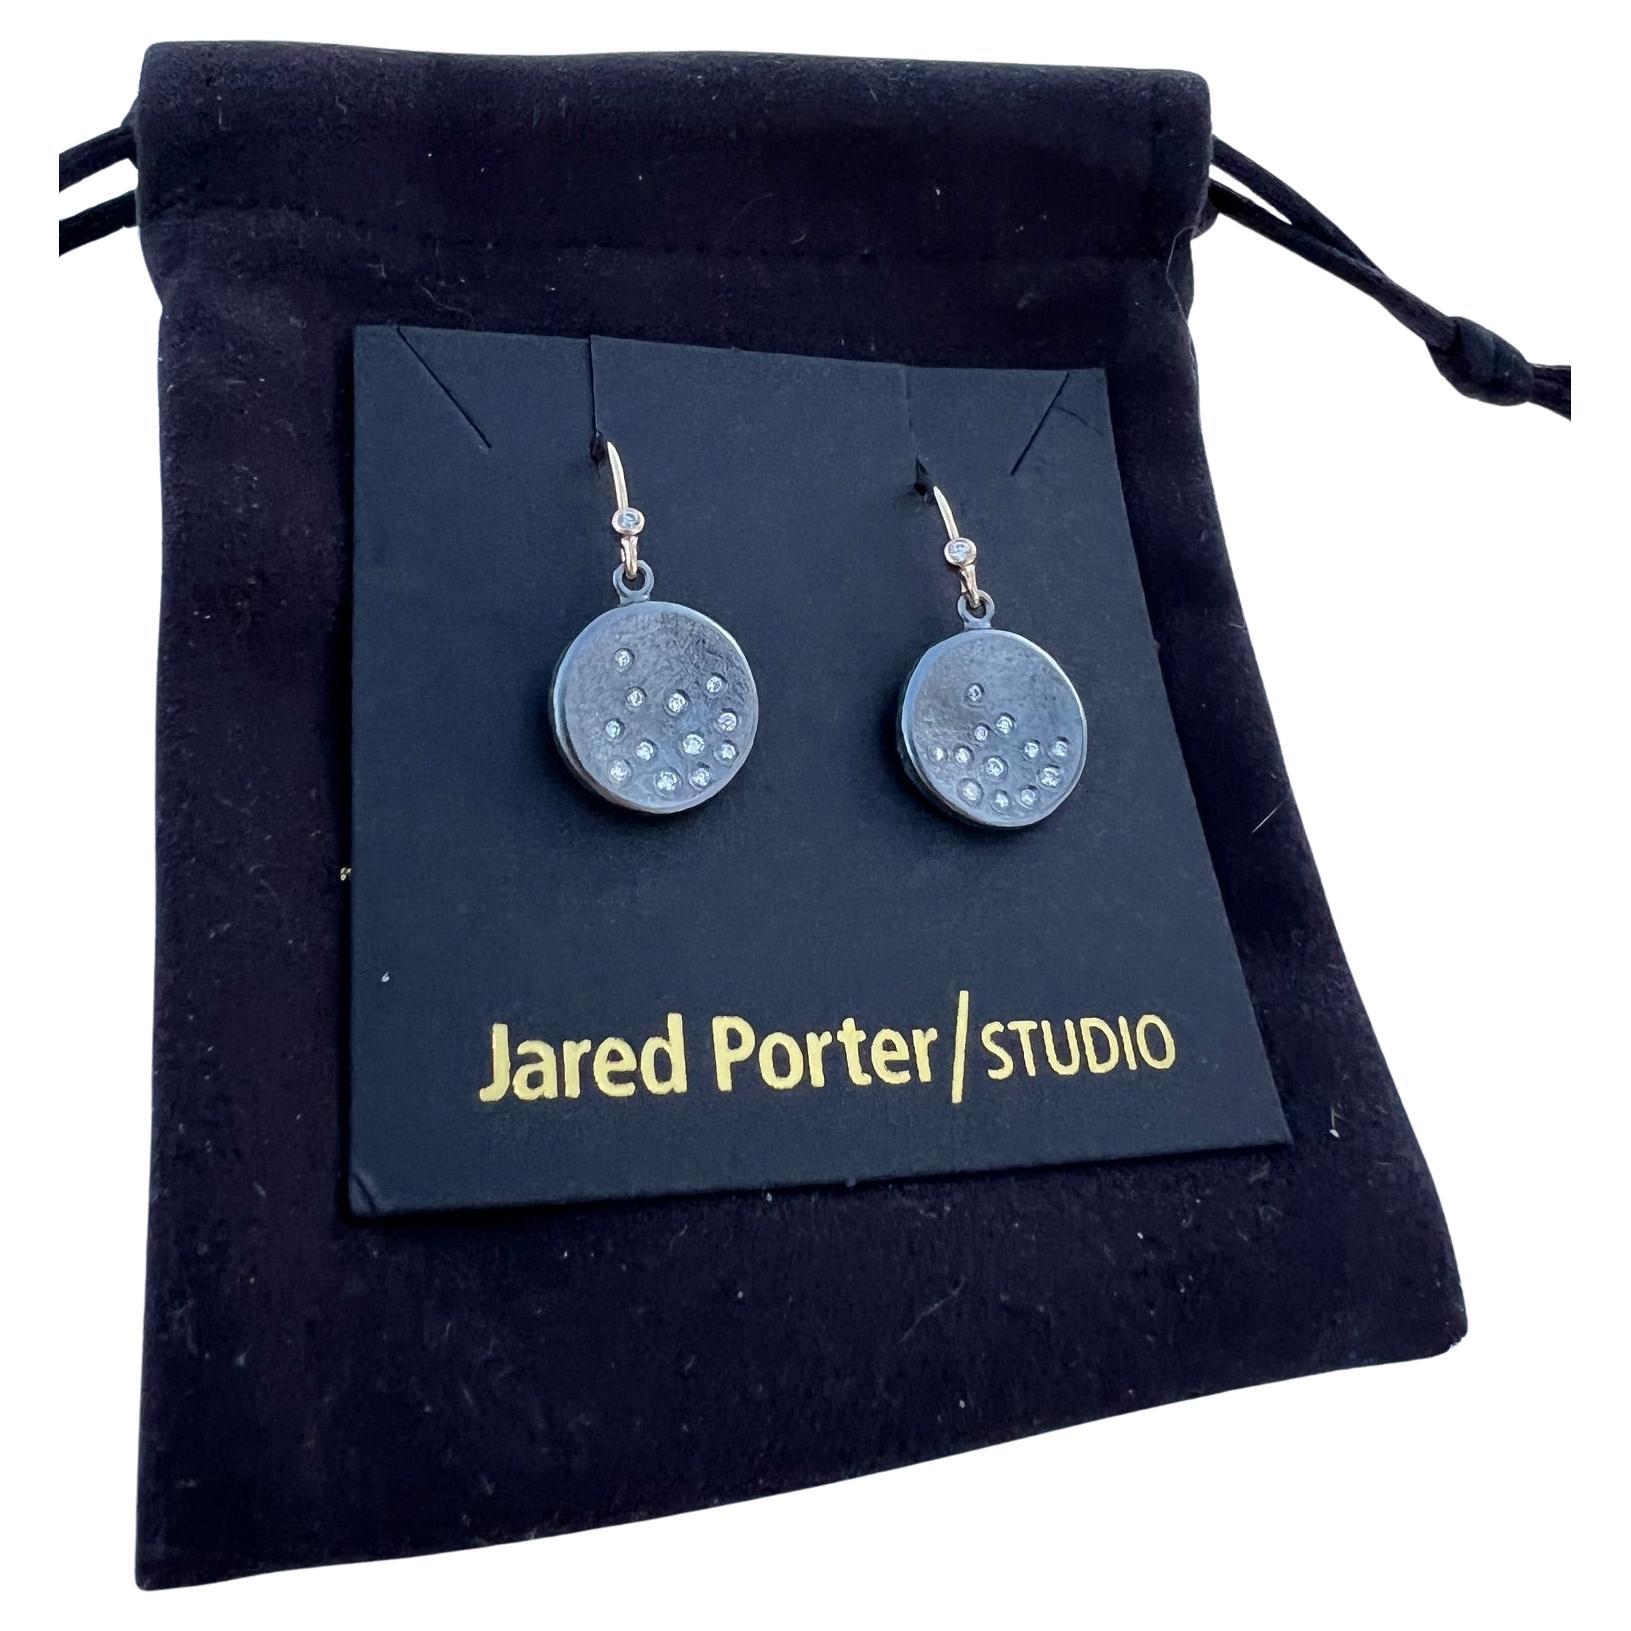 Beautiful earrings hand fabricated by Jared Porter Studio.

The inspiration behind this every day wearing earring was to give the feeling of snowfall or a bright starry nights sky.  

The disc is sterling silver with a dark patina (oxidized) finish